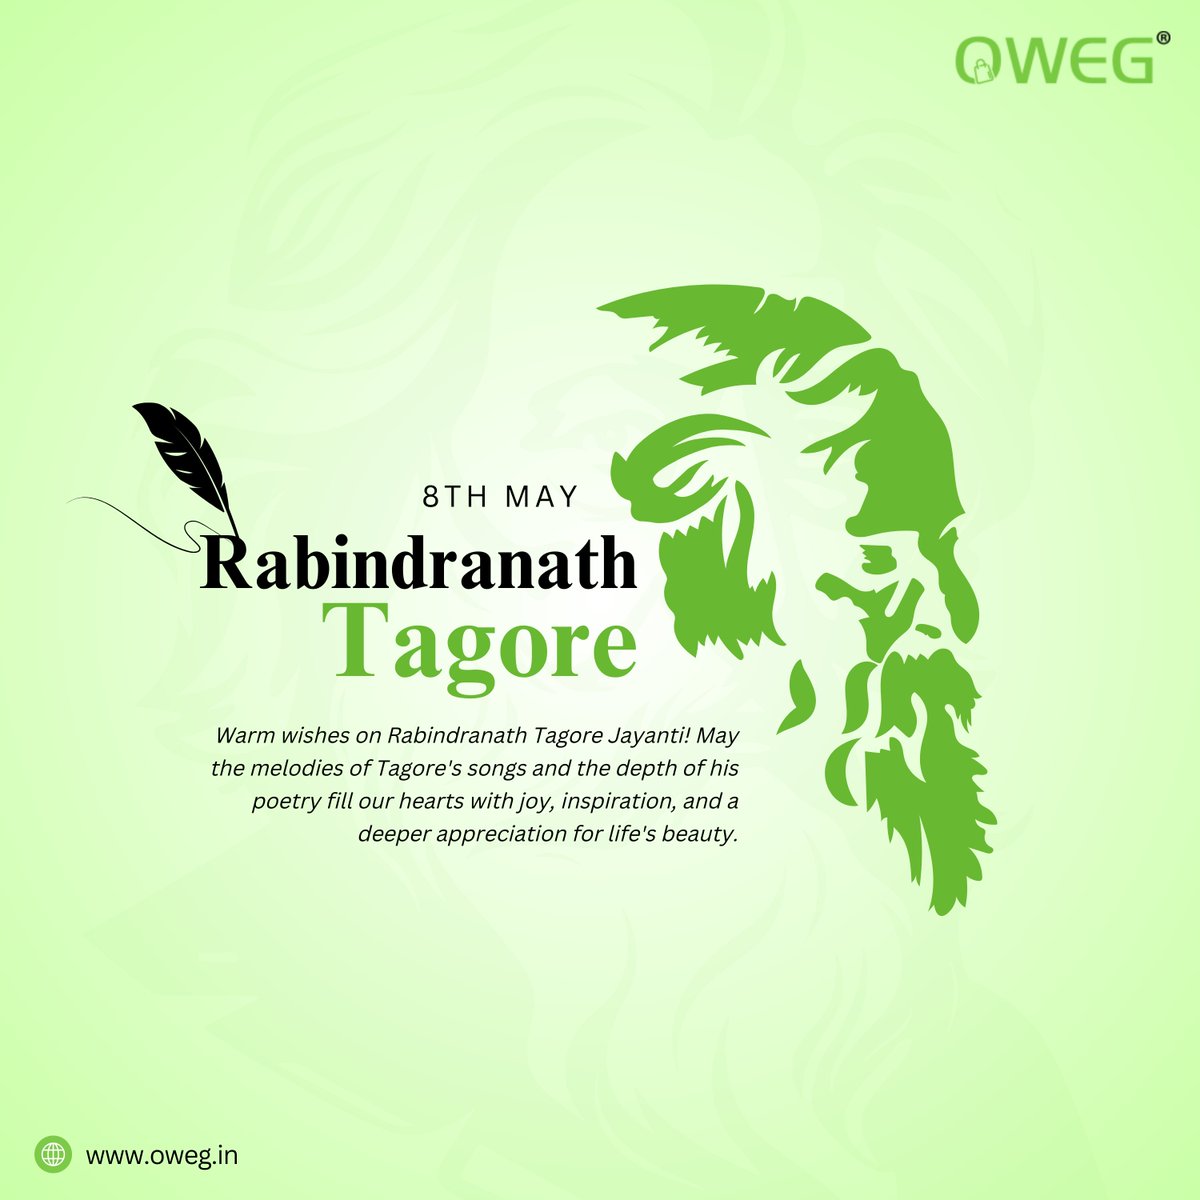 Embracing the poetic whispers of Tagore's legacy today and always! 

#oweg #rabindranathjayanti #tagoretunes #melodiesofmyheart #tagorevibes #poeticwhispers #soulfulsymphony #tagoretango